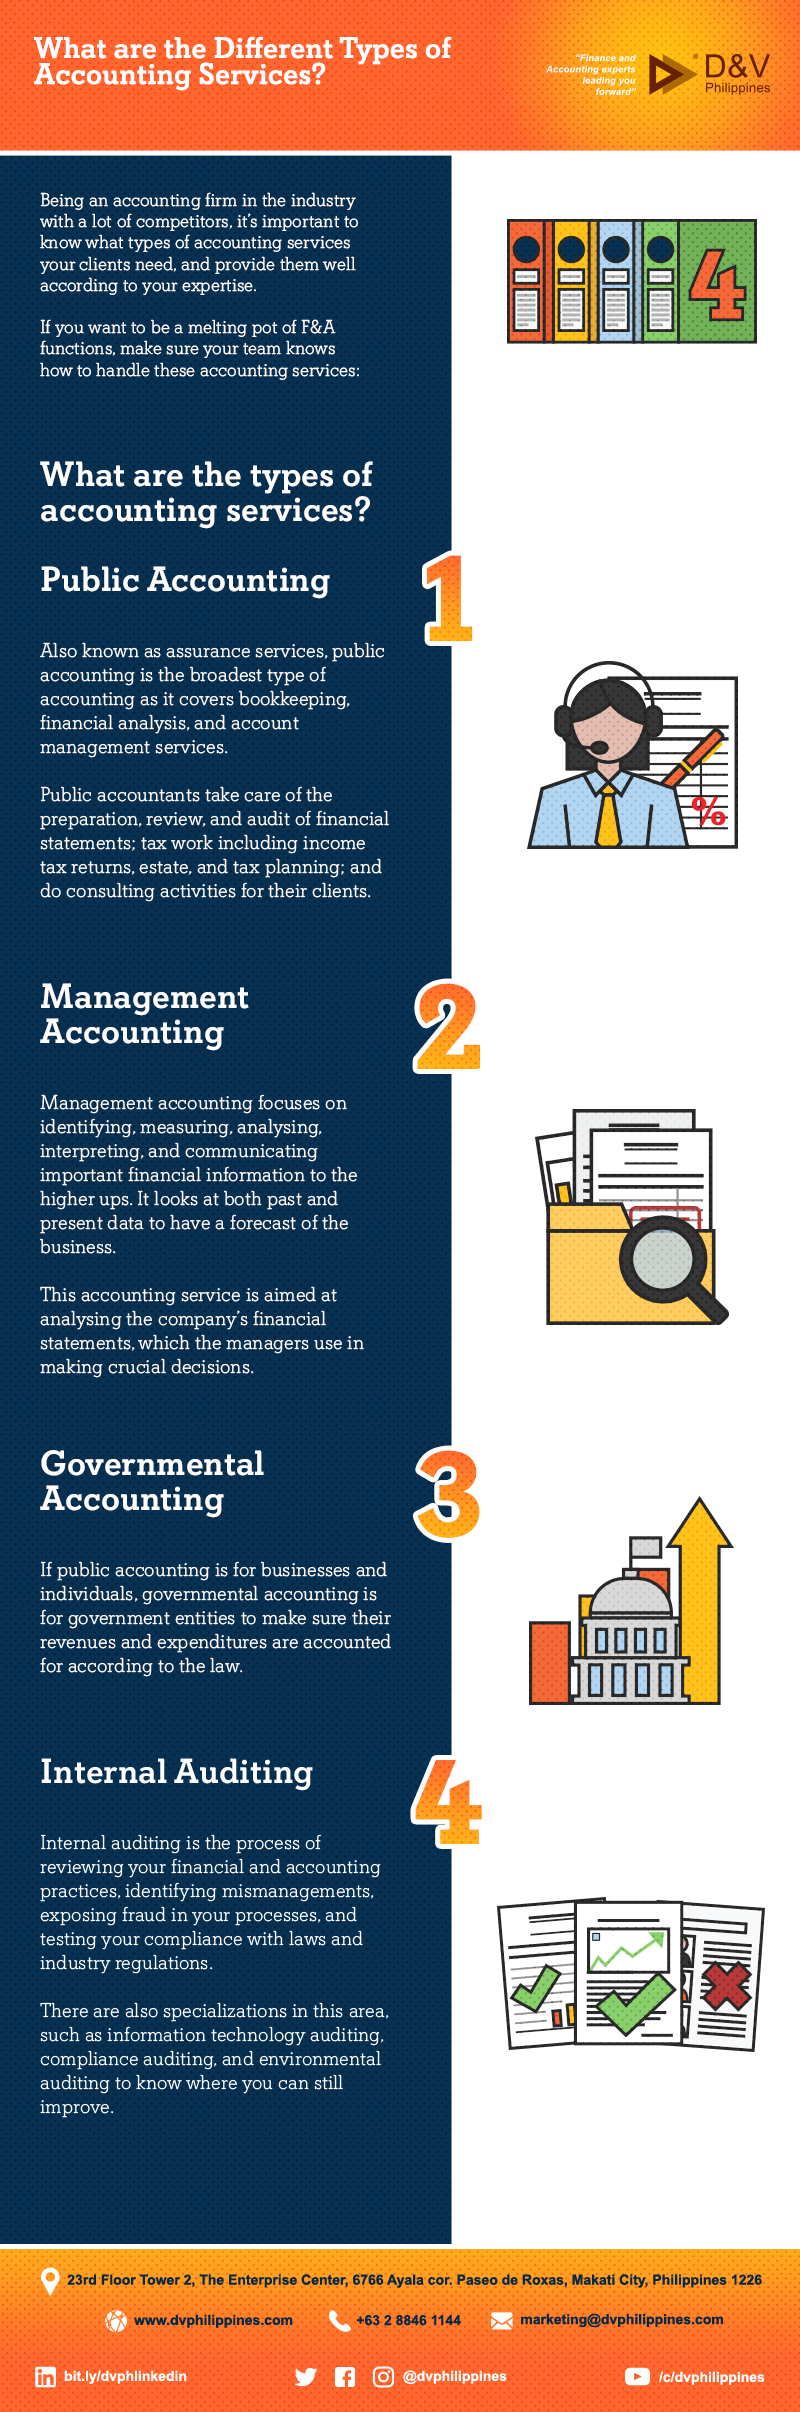 Infog_W_C_Title_What-are-the-Different-Types-of-Accounting-ServicesMain